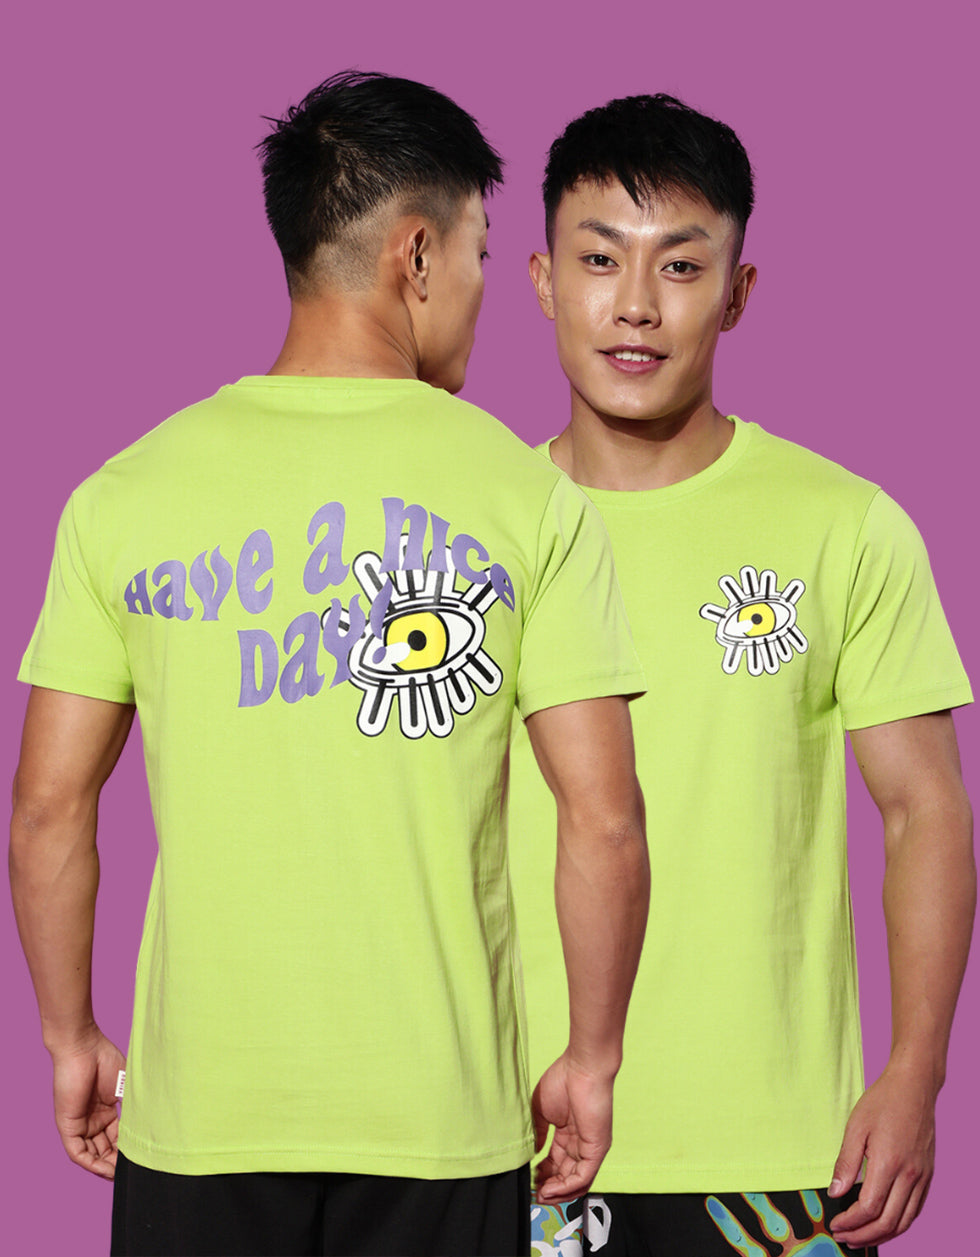 Have Nice Day Back Printed Back Graphic Printed Tshirt